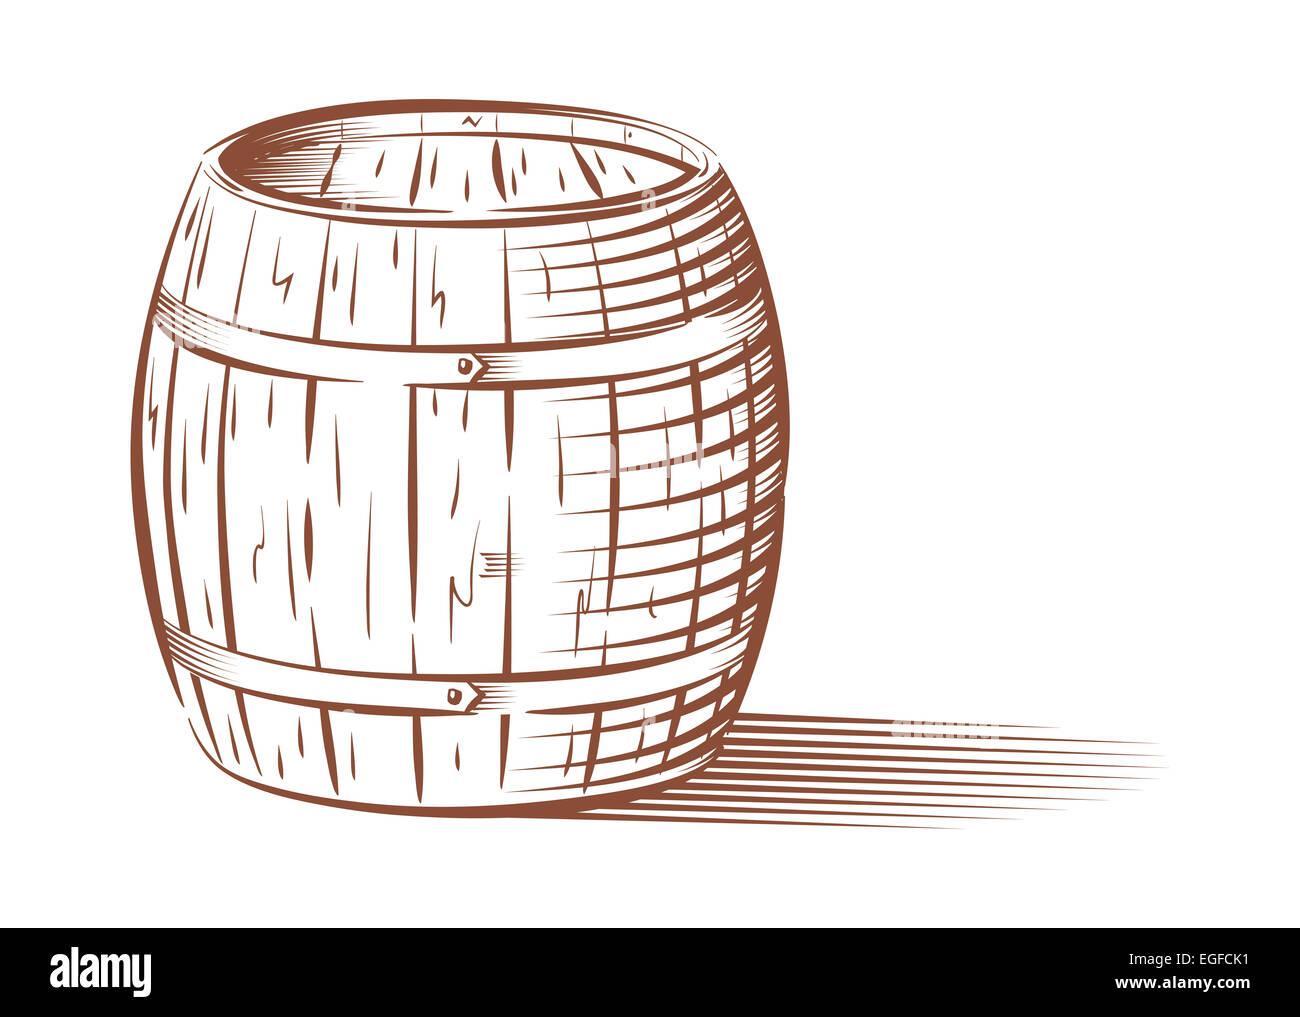 Vector engraved beer or wine barrel, isolated on white background Stock Photo